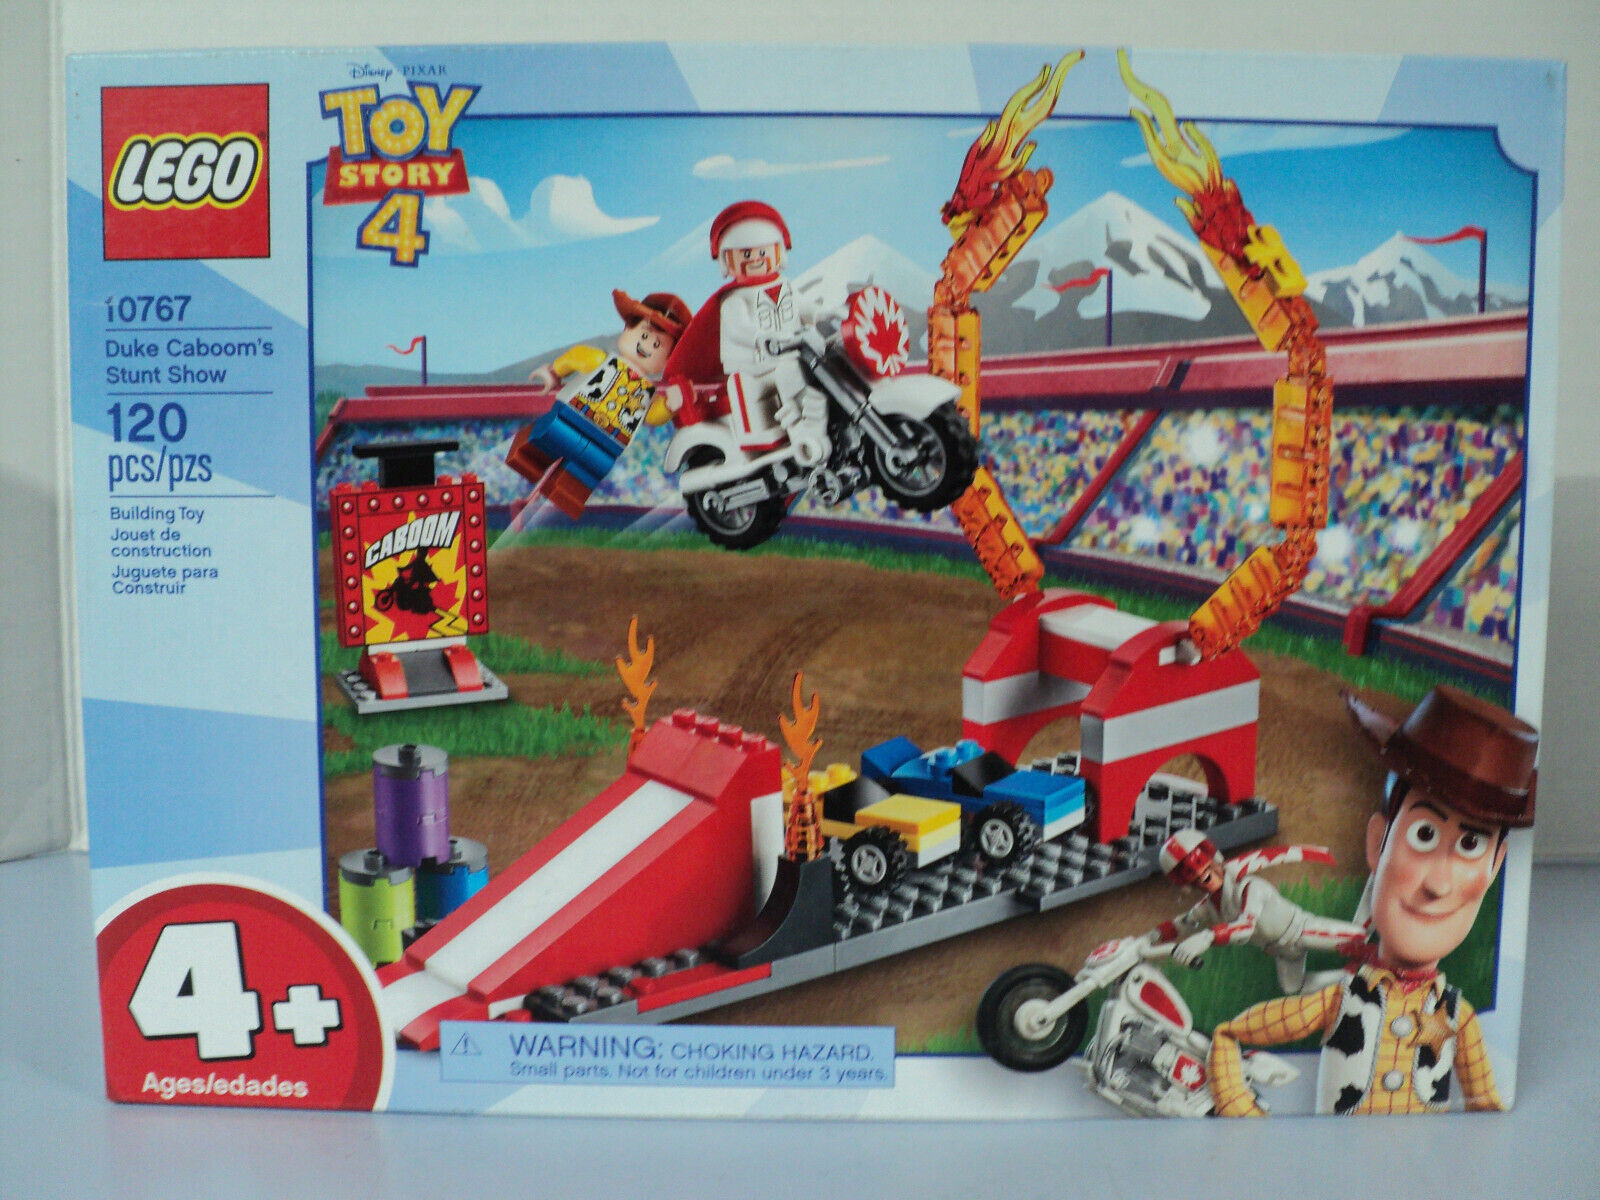 Lego Toy Story 4 Kit 10767 Duke Caboom's Stunt Show New in Box 120 Pieces Disey